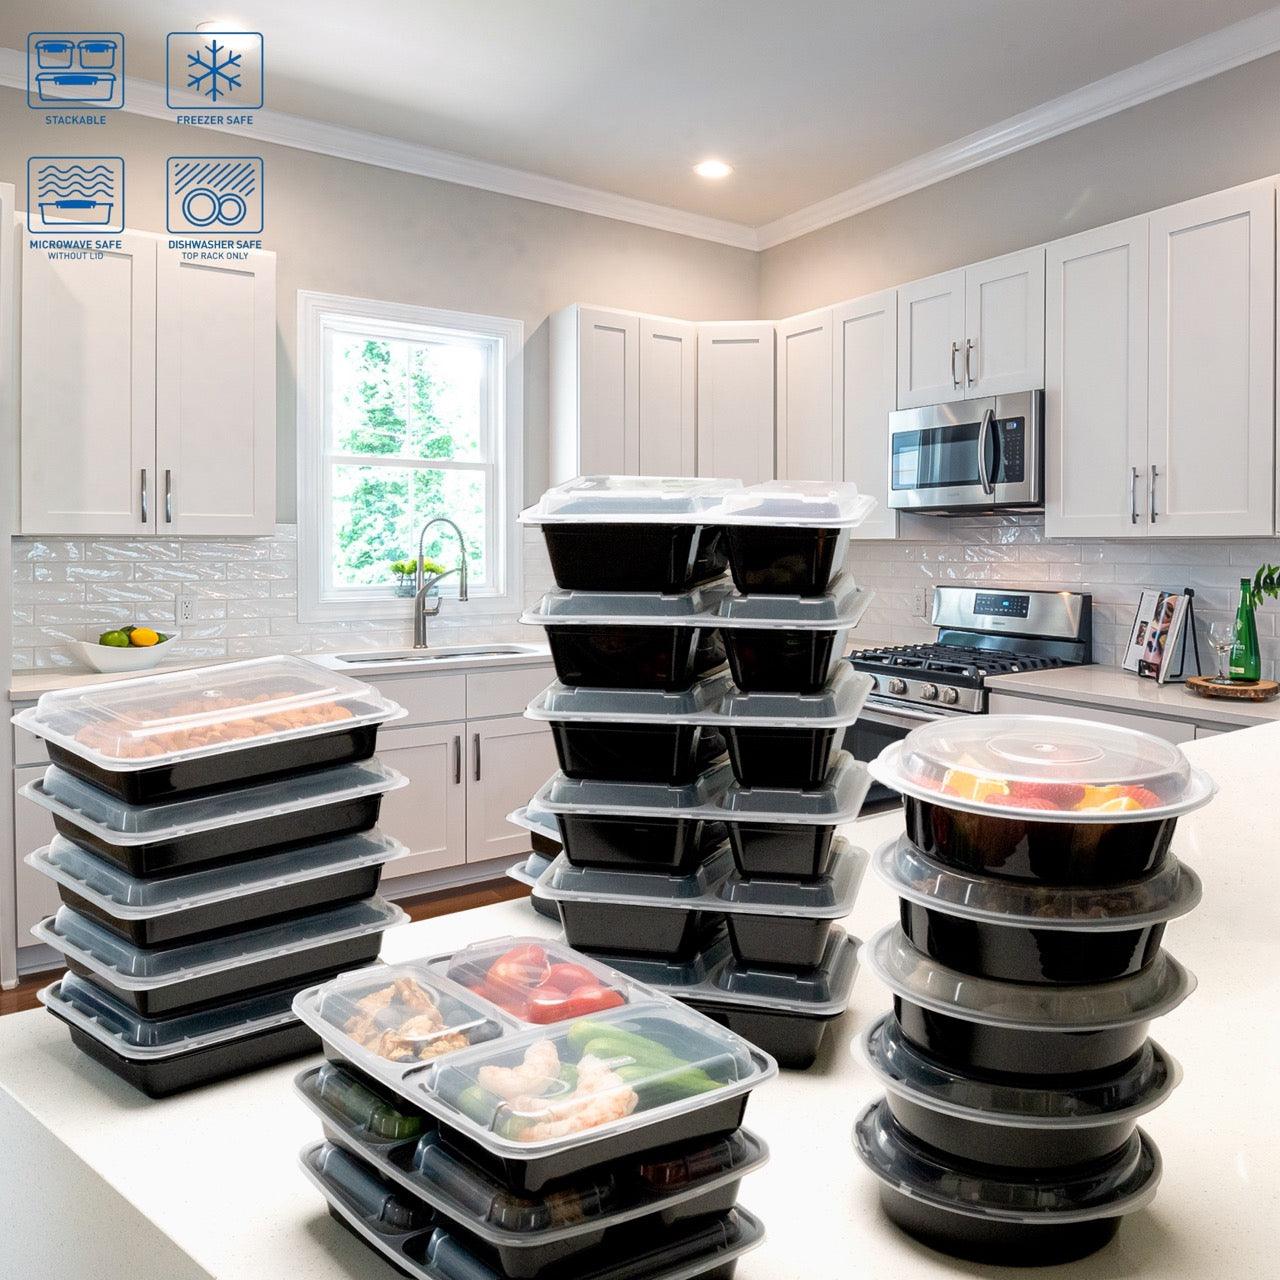 30 Pack 3-Compartment Reusable Meal Prep Containers Black [942ml] - Jugglebox Australia